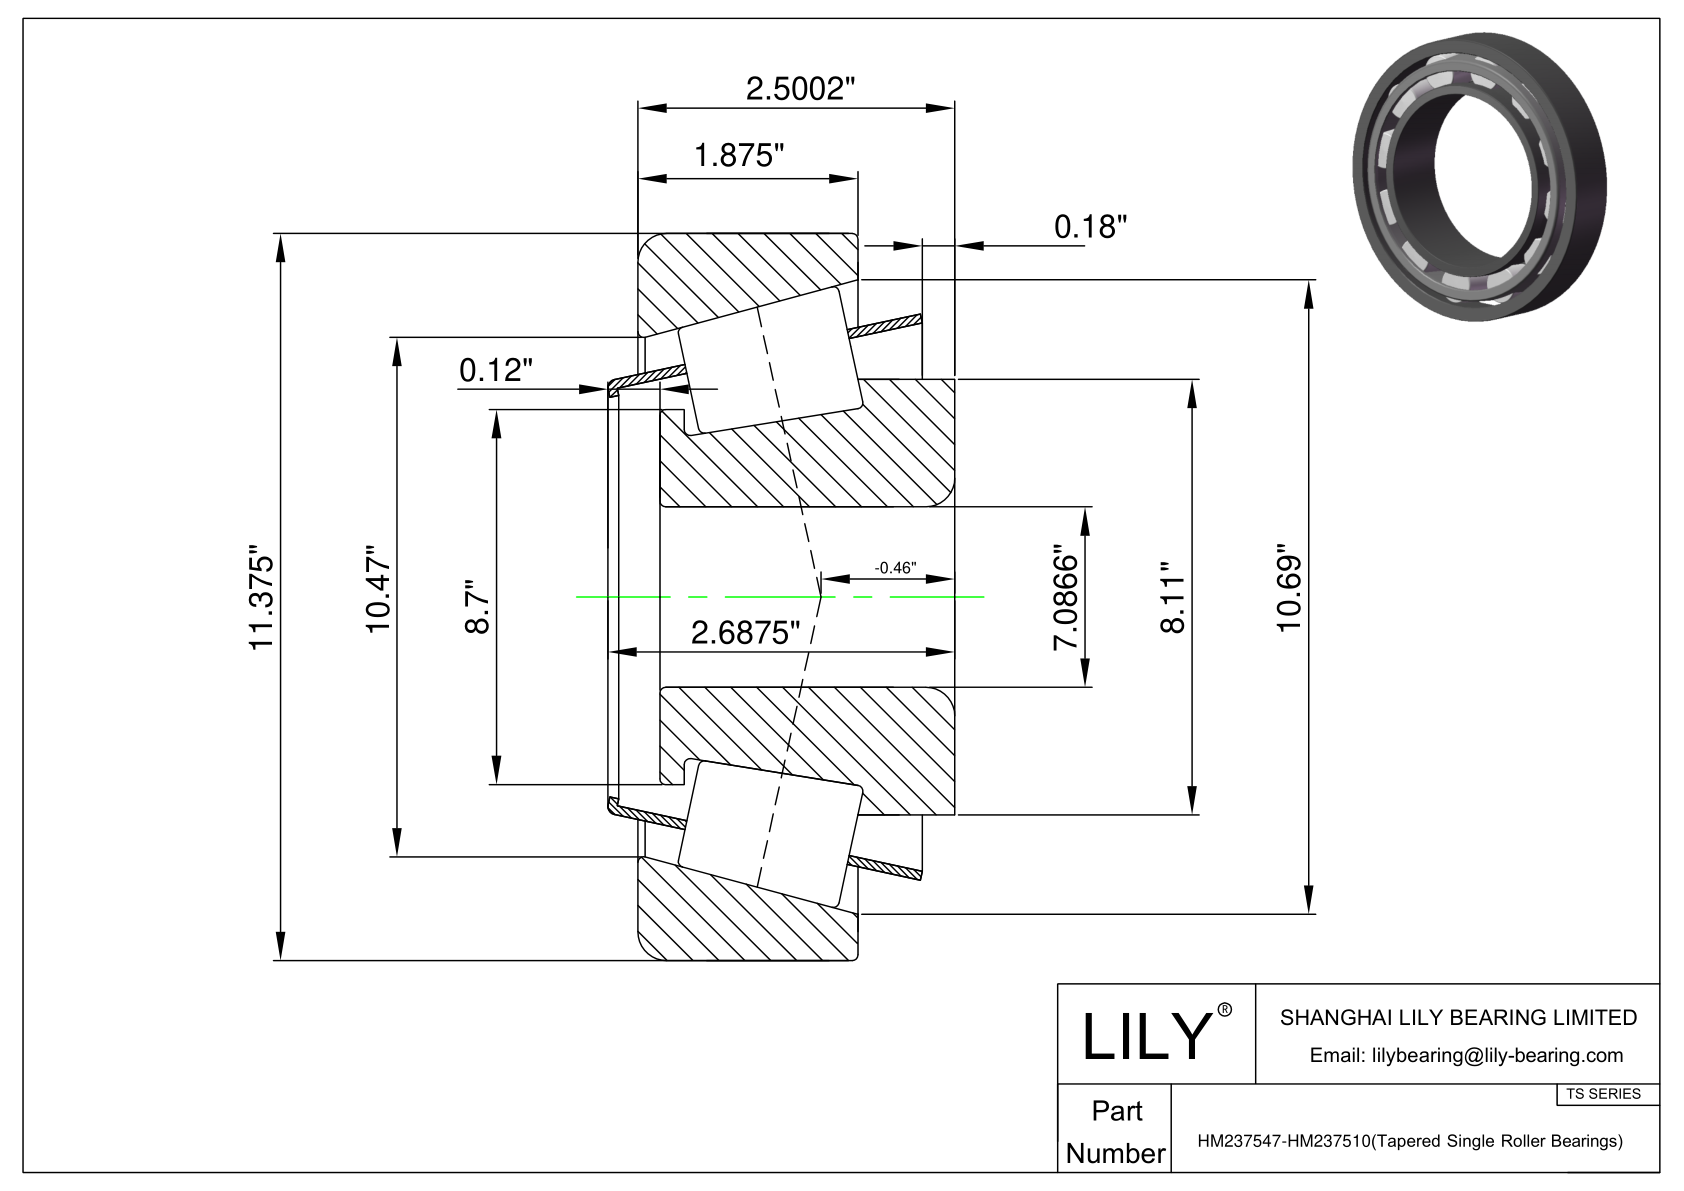 HM237547-HM237510 TS (Tapered Single Roller Bearings) (Imperial) cad drawing